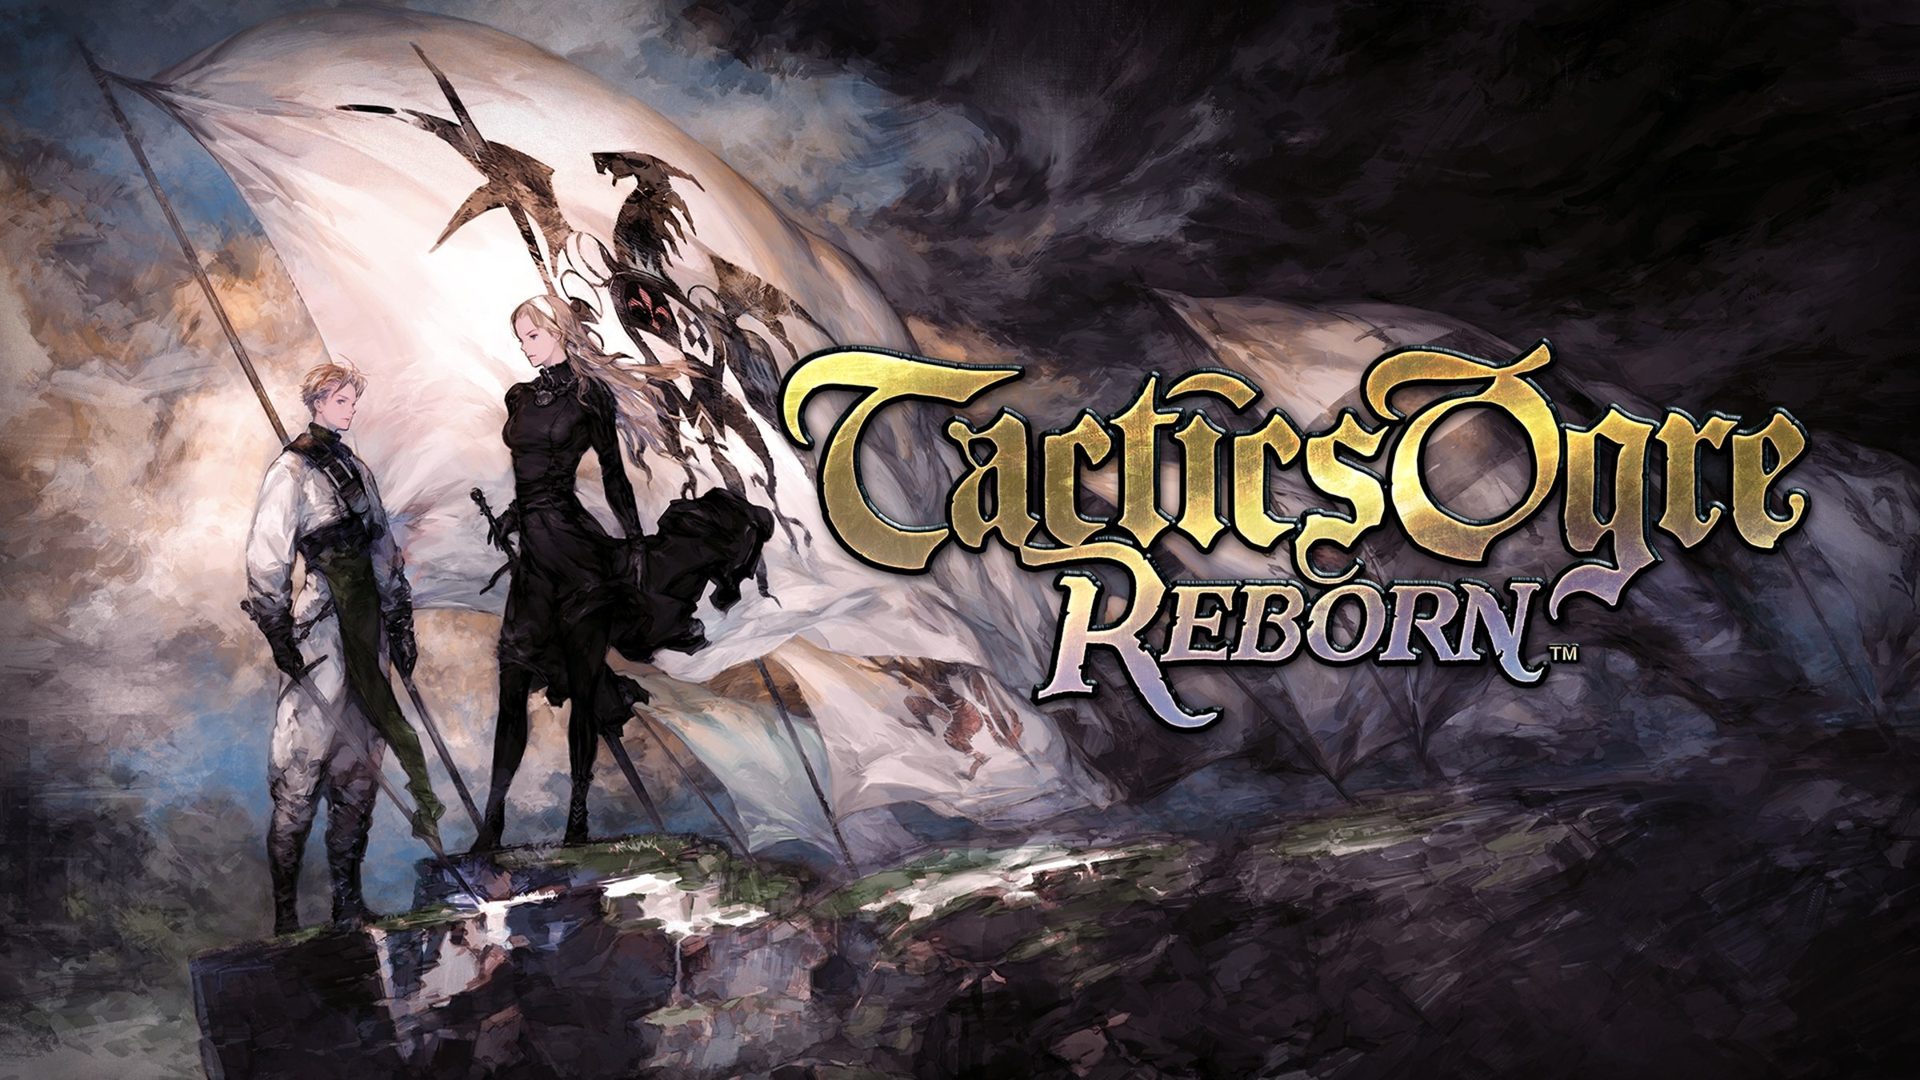 Tactics Ogre Reborn routes (Law, chaos, and neutral) explained